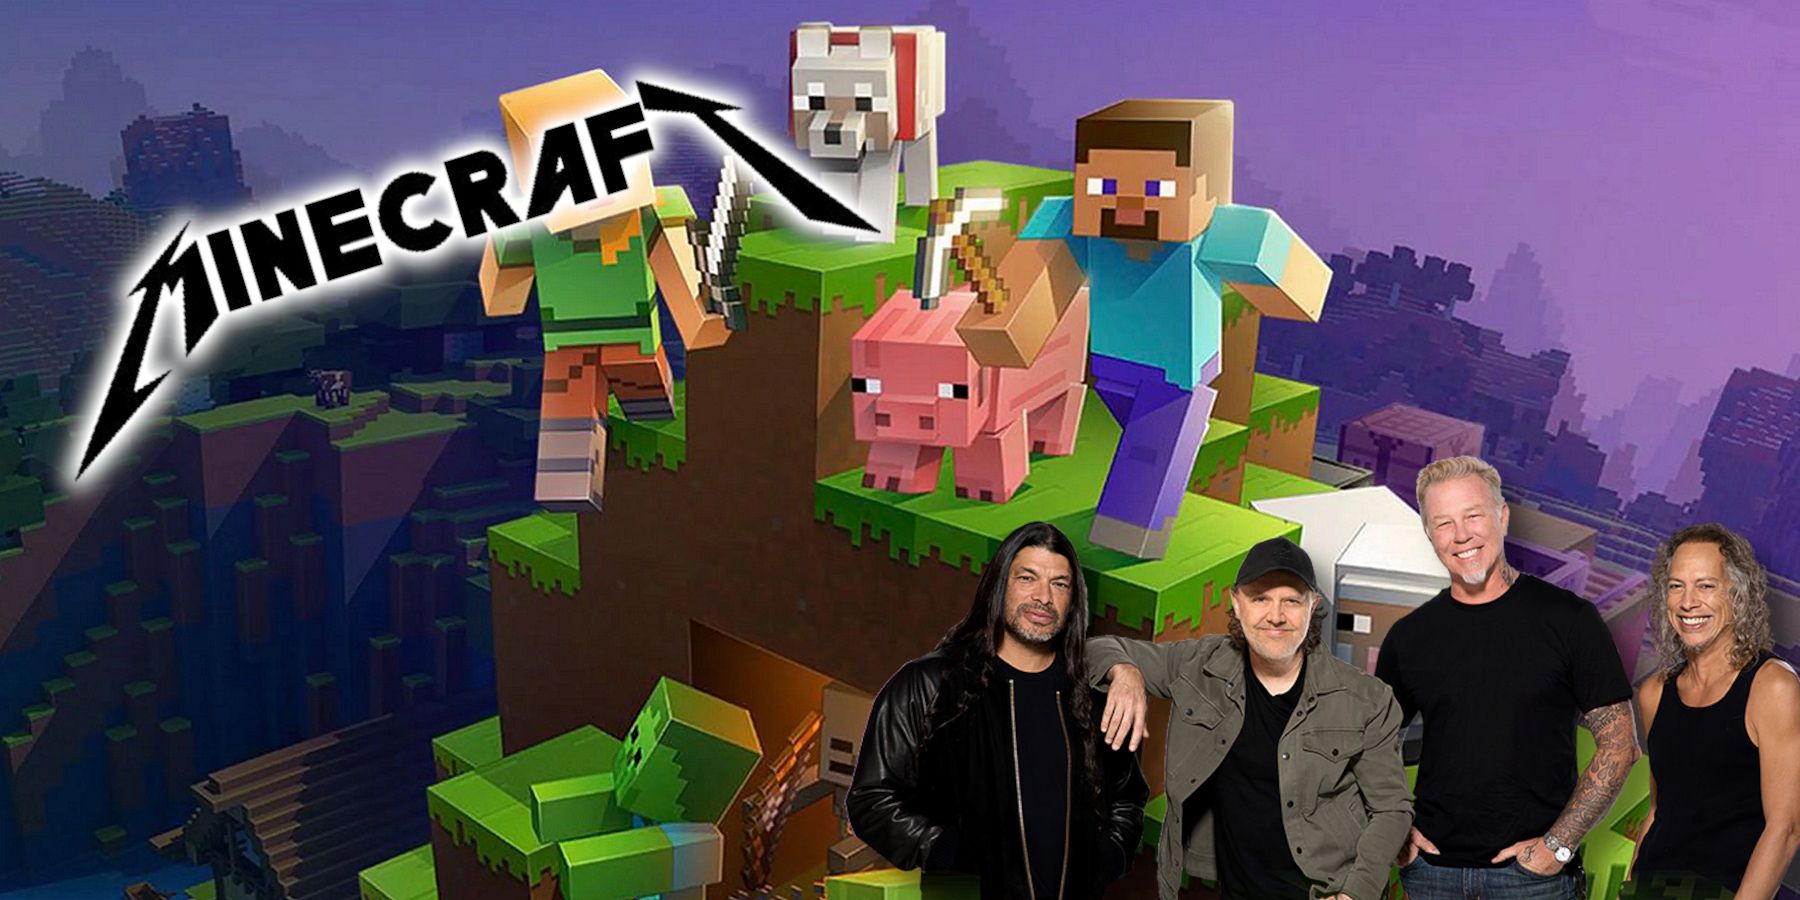 Image from Minecraft showing Metallica in one corner and the game's logo written out in the Metallica font.